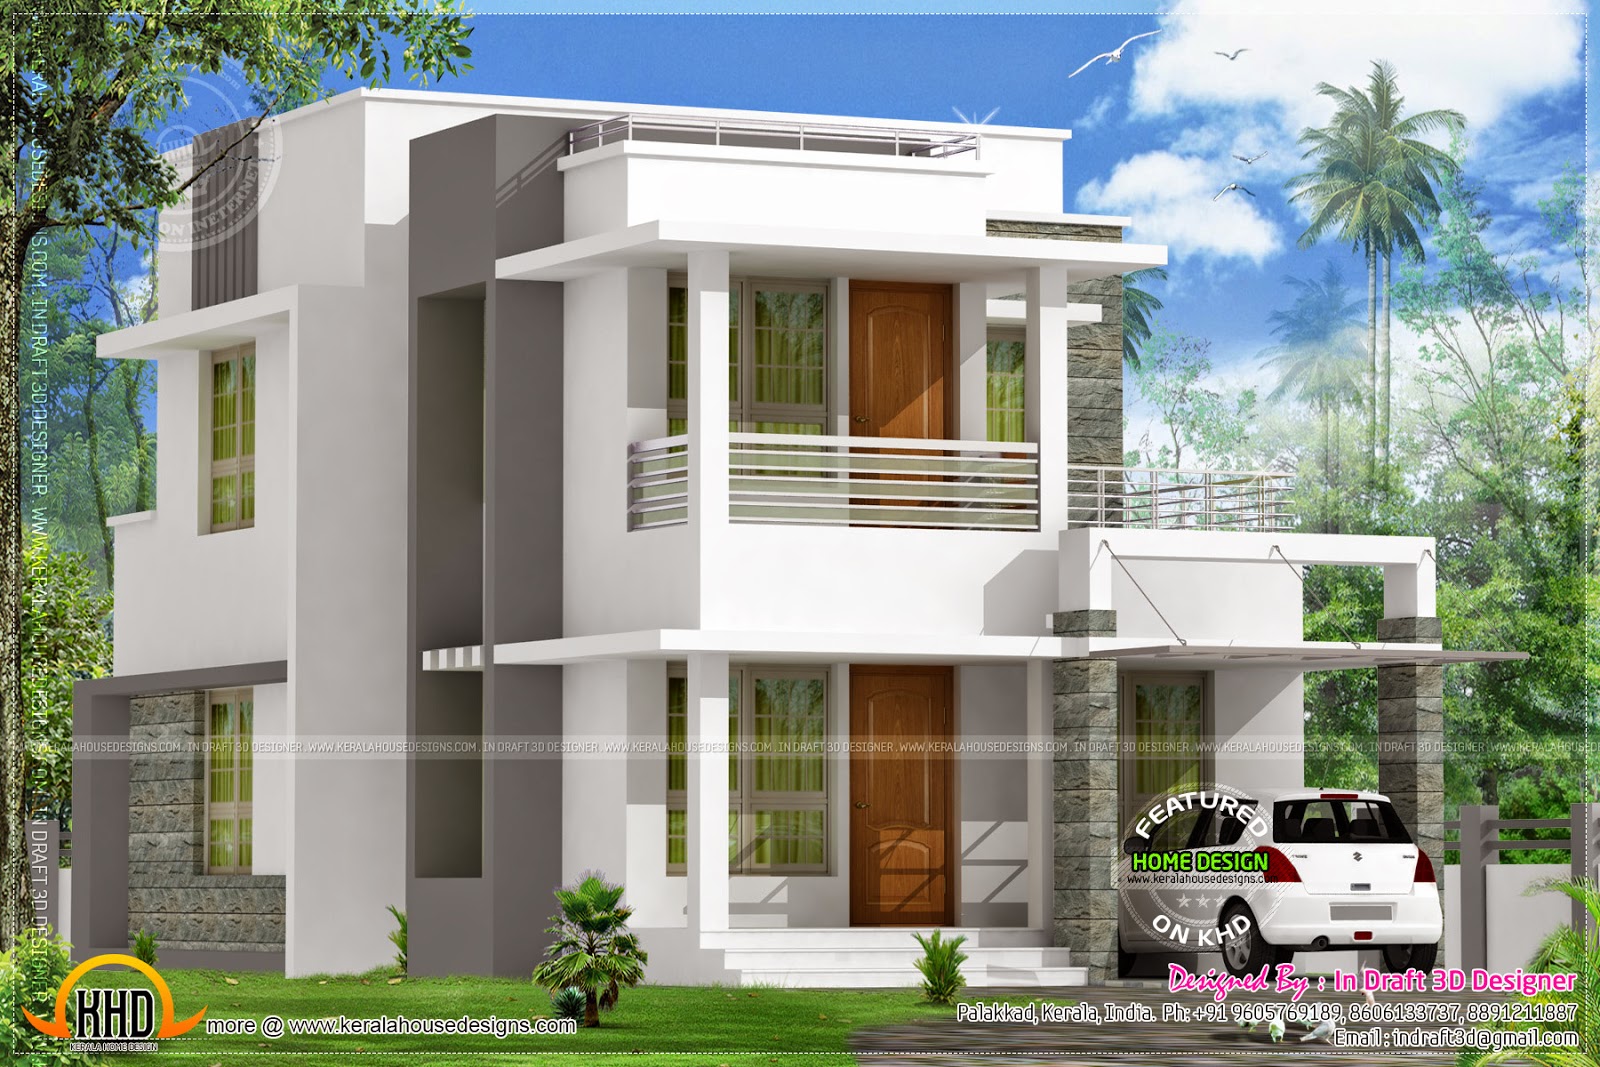 World Small Front Flat House Design Zion Modern House